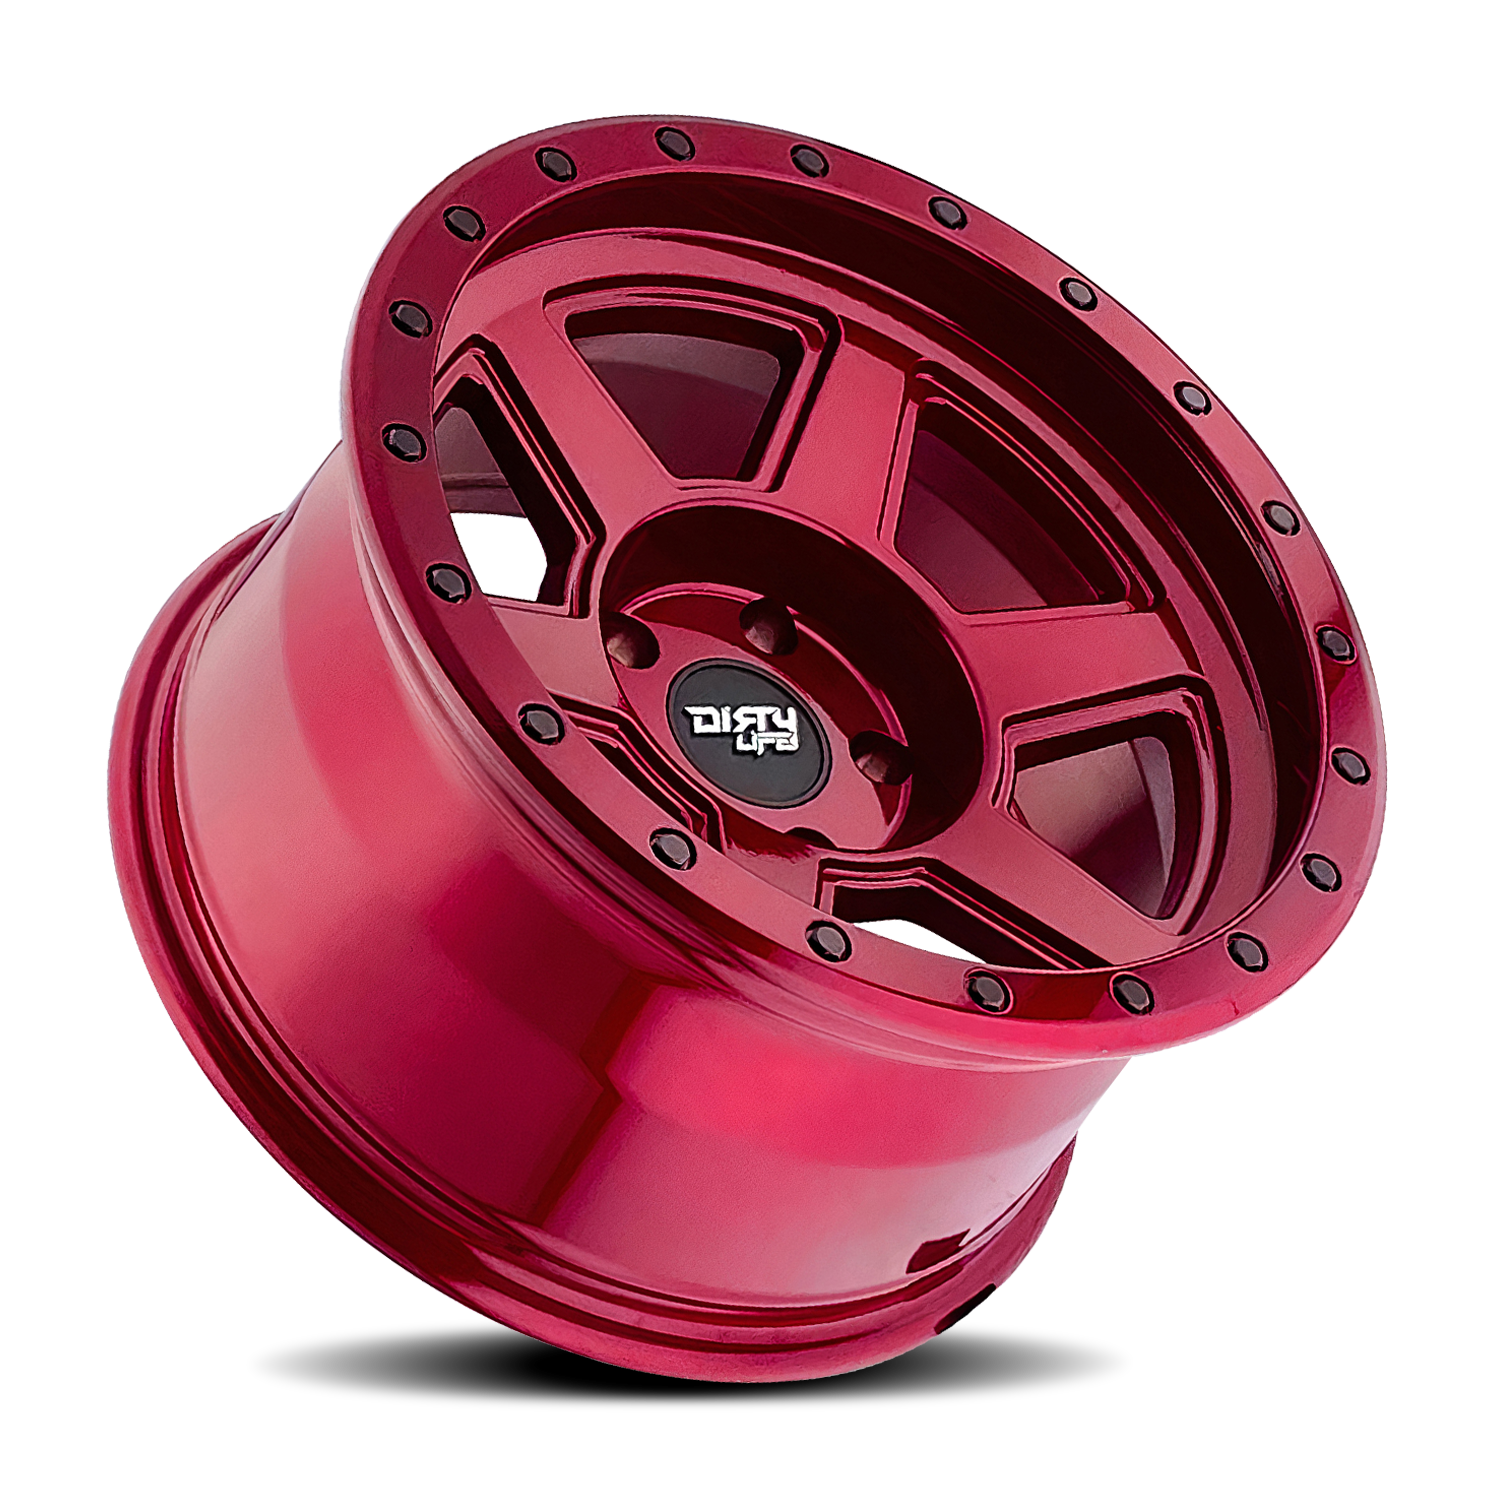 Dirty Life COMPOUND Crimson candy red 18x9 -12 6x139.7mm 106mm